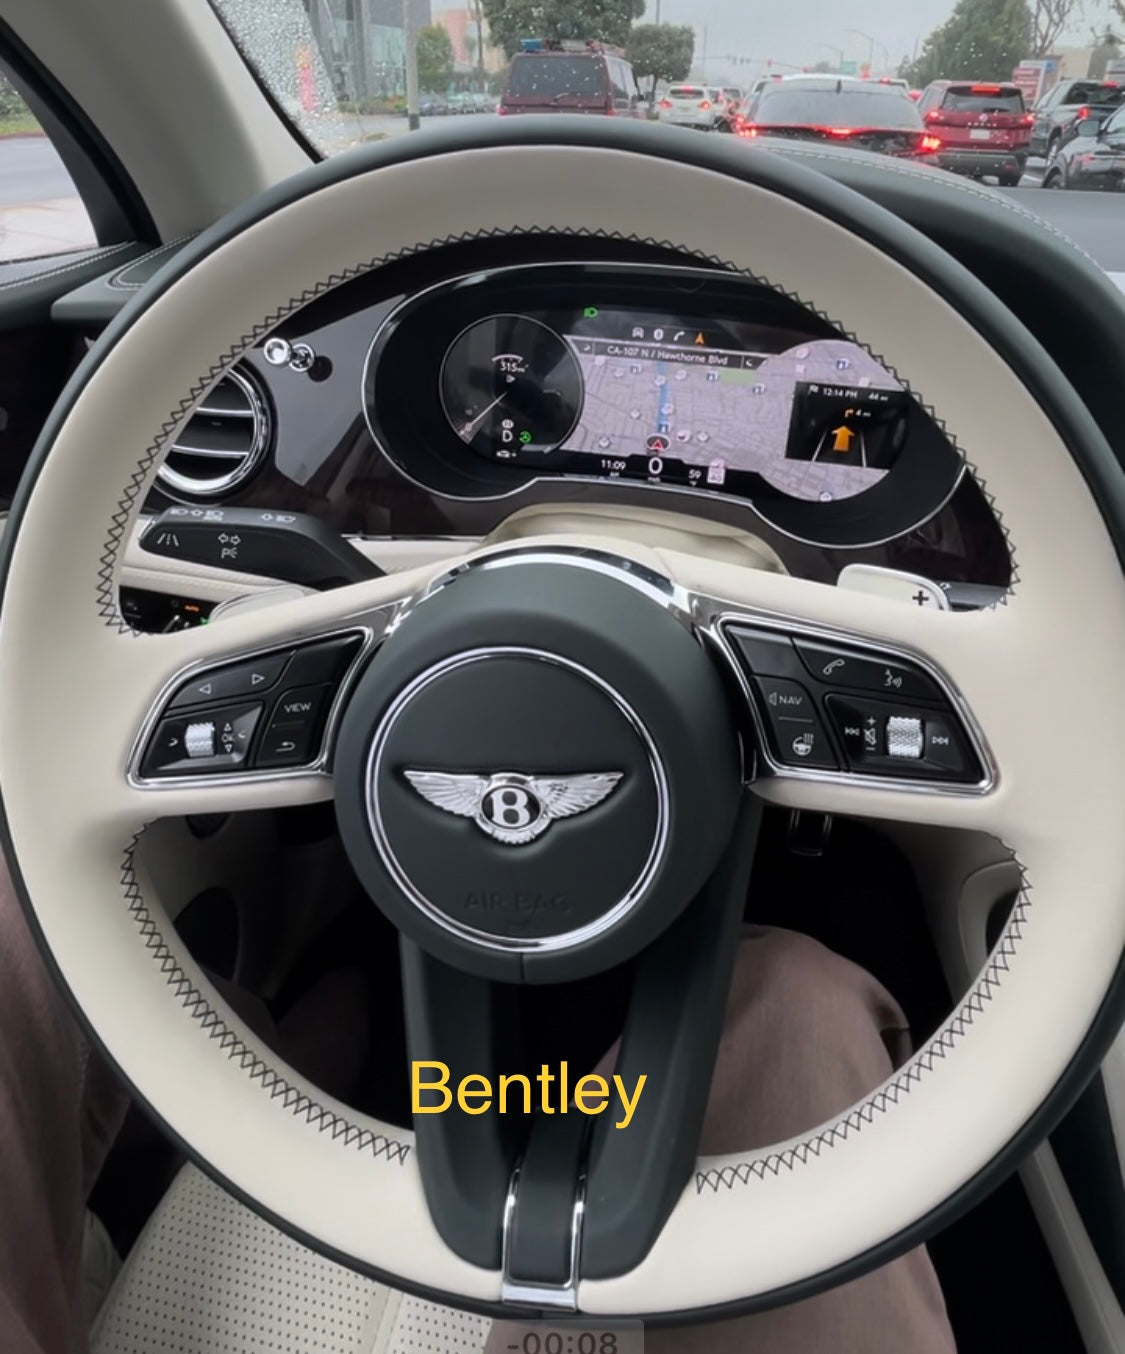 NEW ARRIVAL! Tesla Bespoke Luxury Steering Wheel Wrap - INSTANT INTRODUCTORY DISCOUNT at checkout!